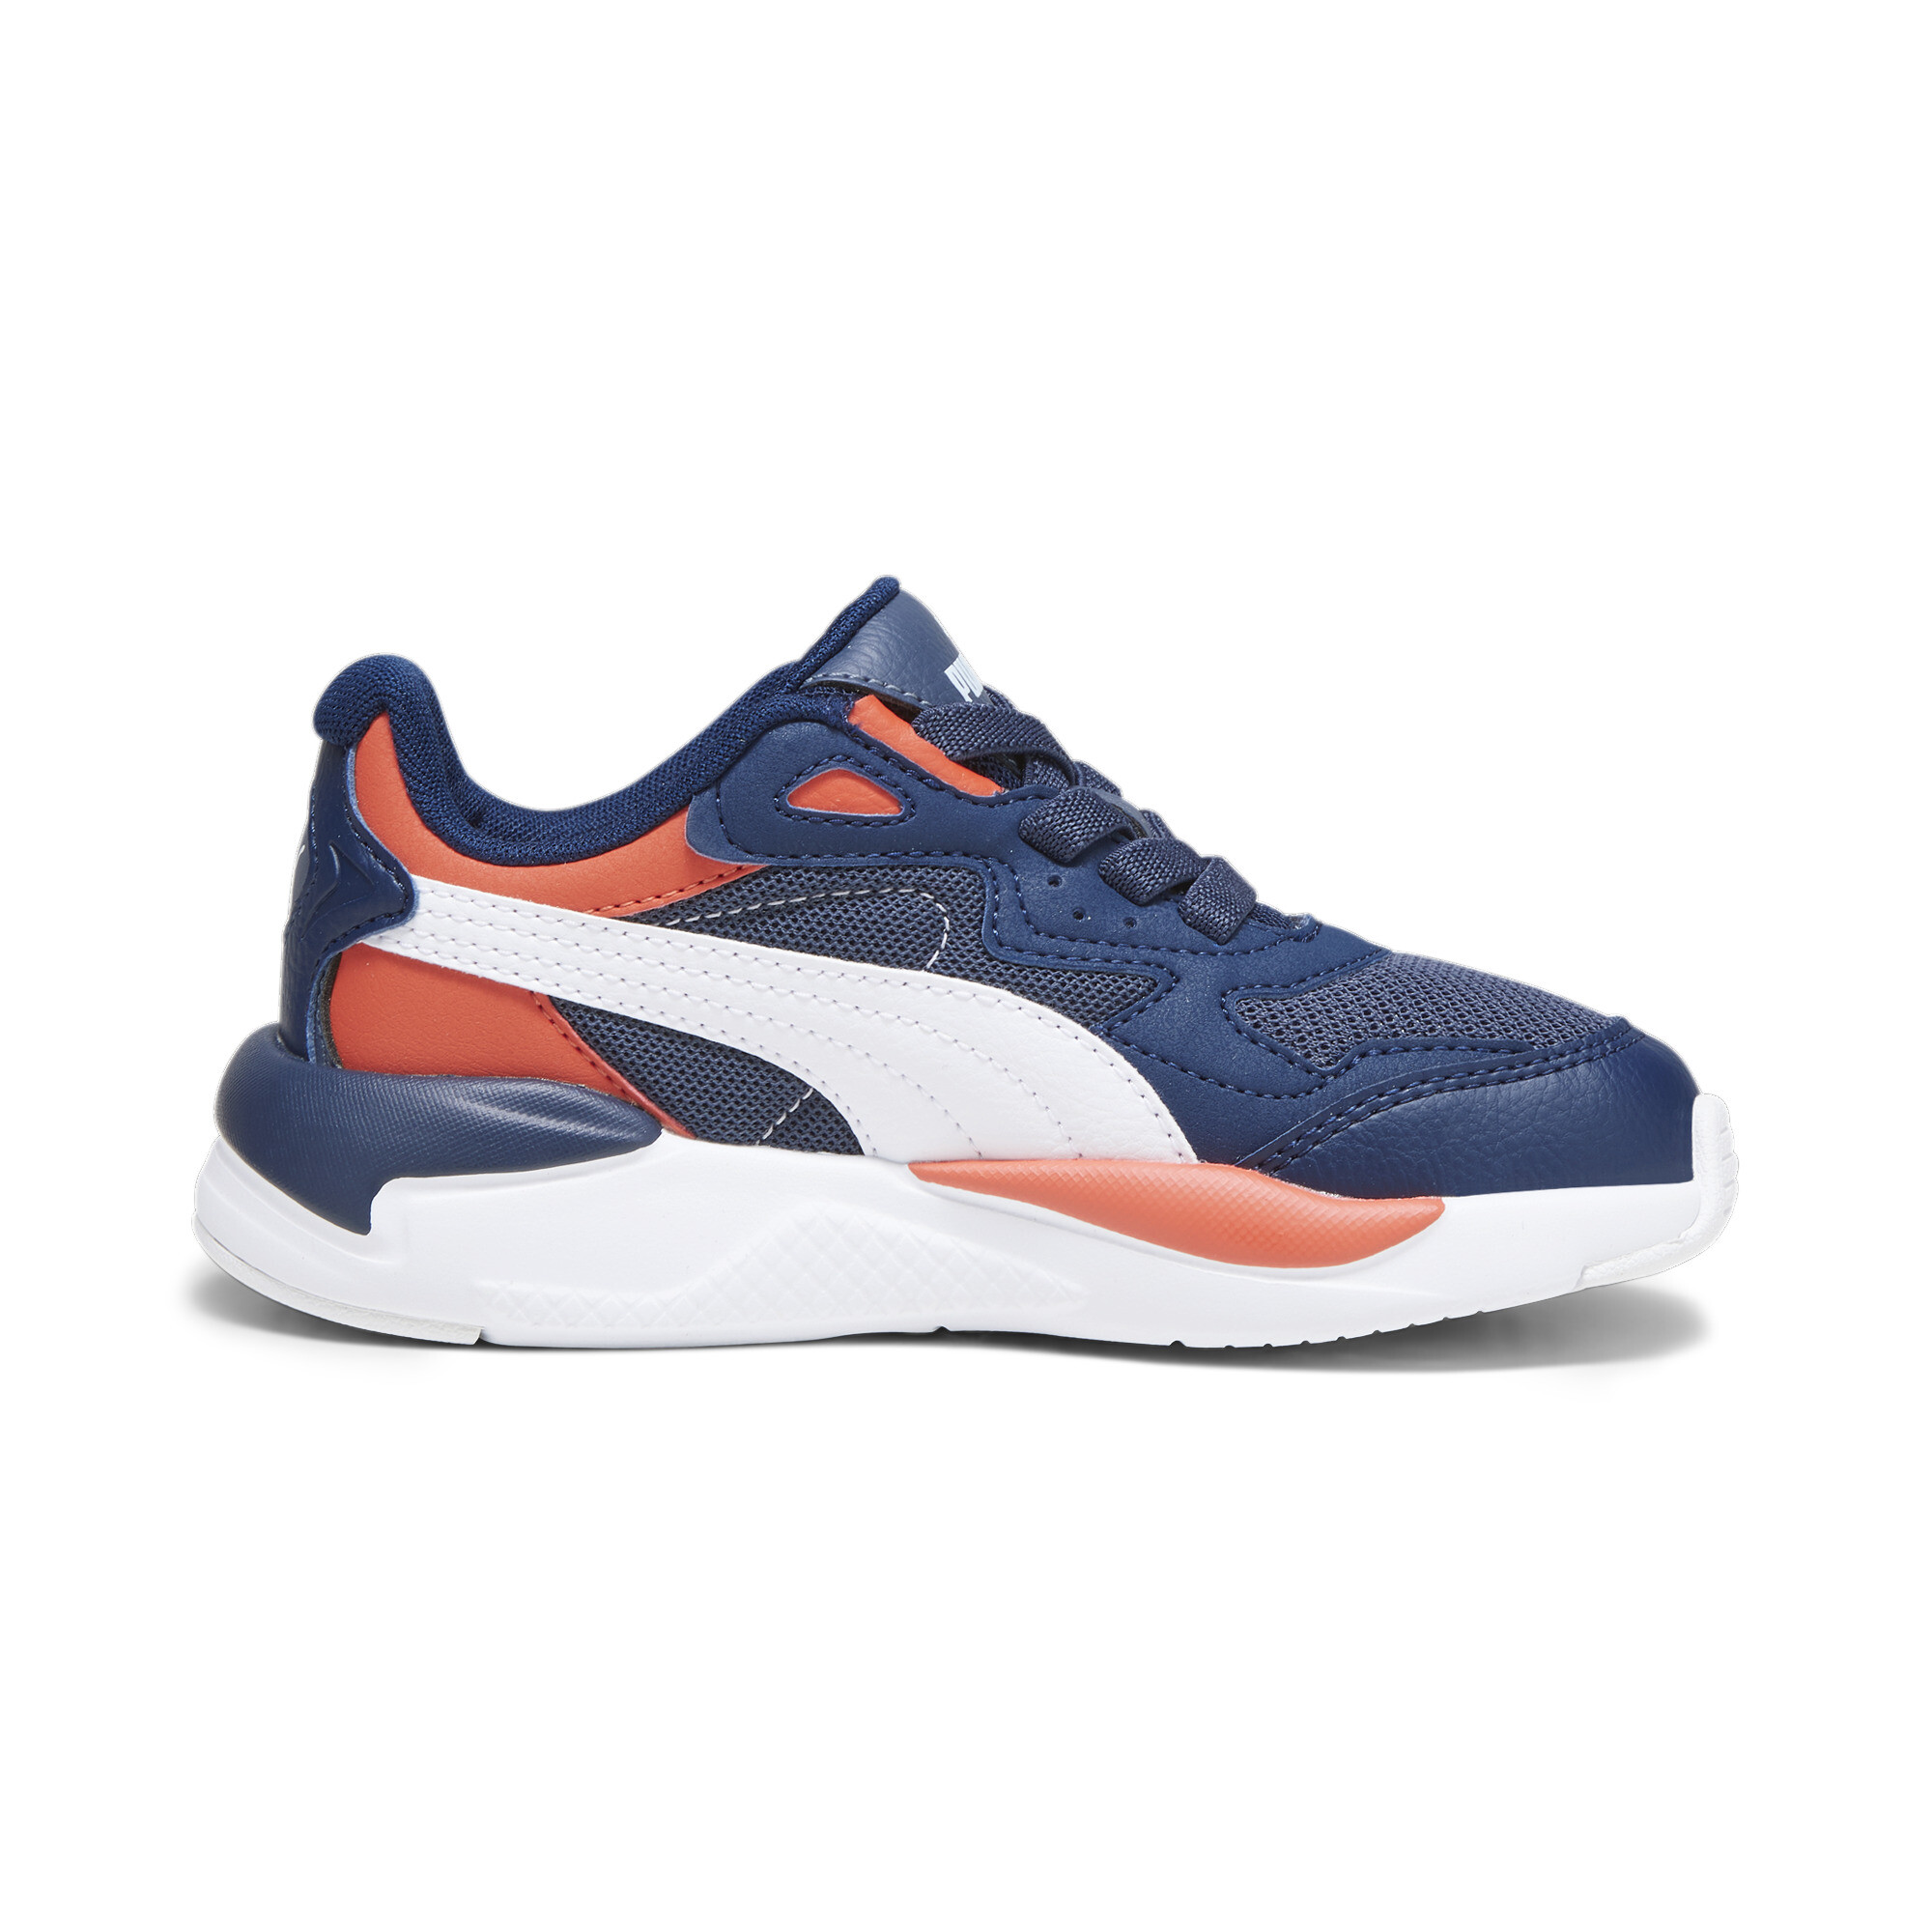 Puma X-Ray Speed AC Kids' Trainers, Blue, Size 28, Shoes